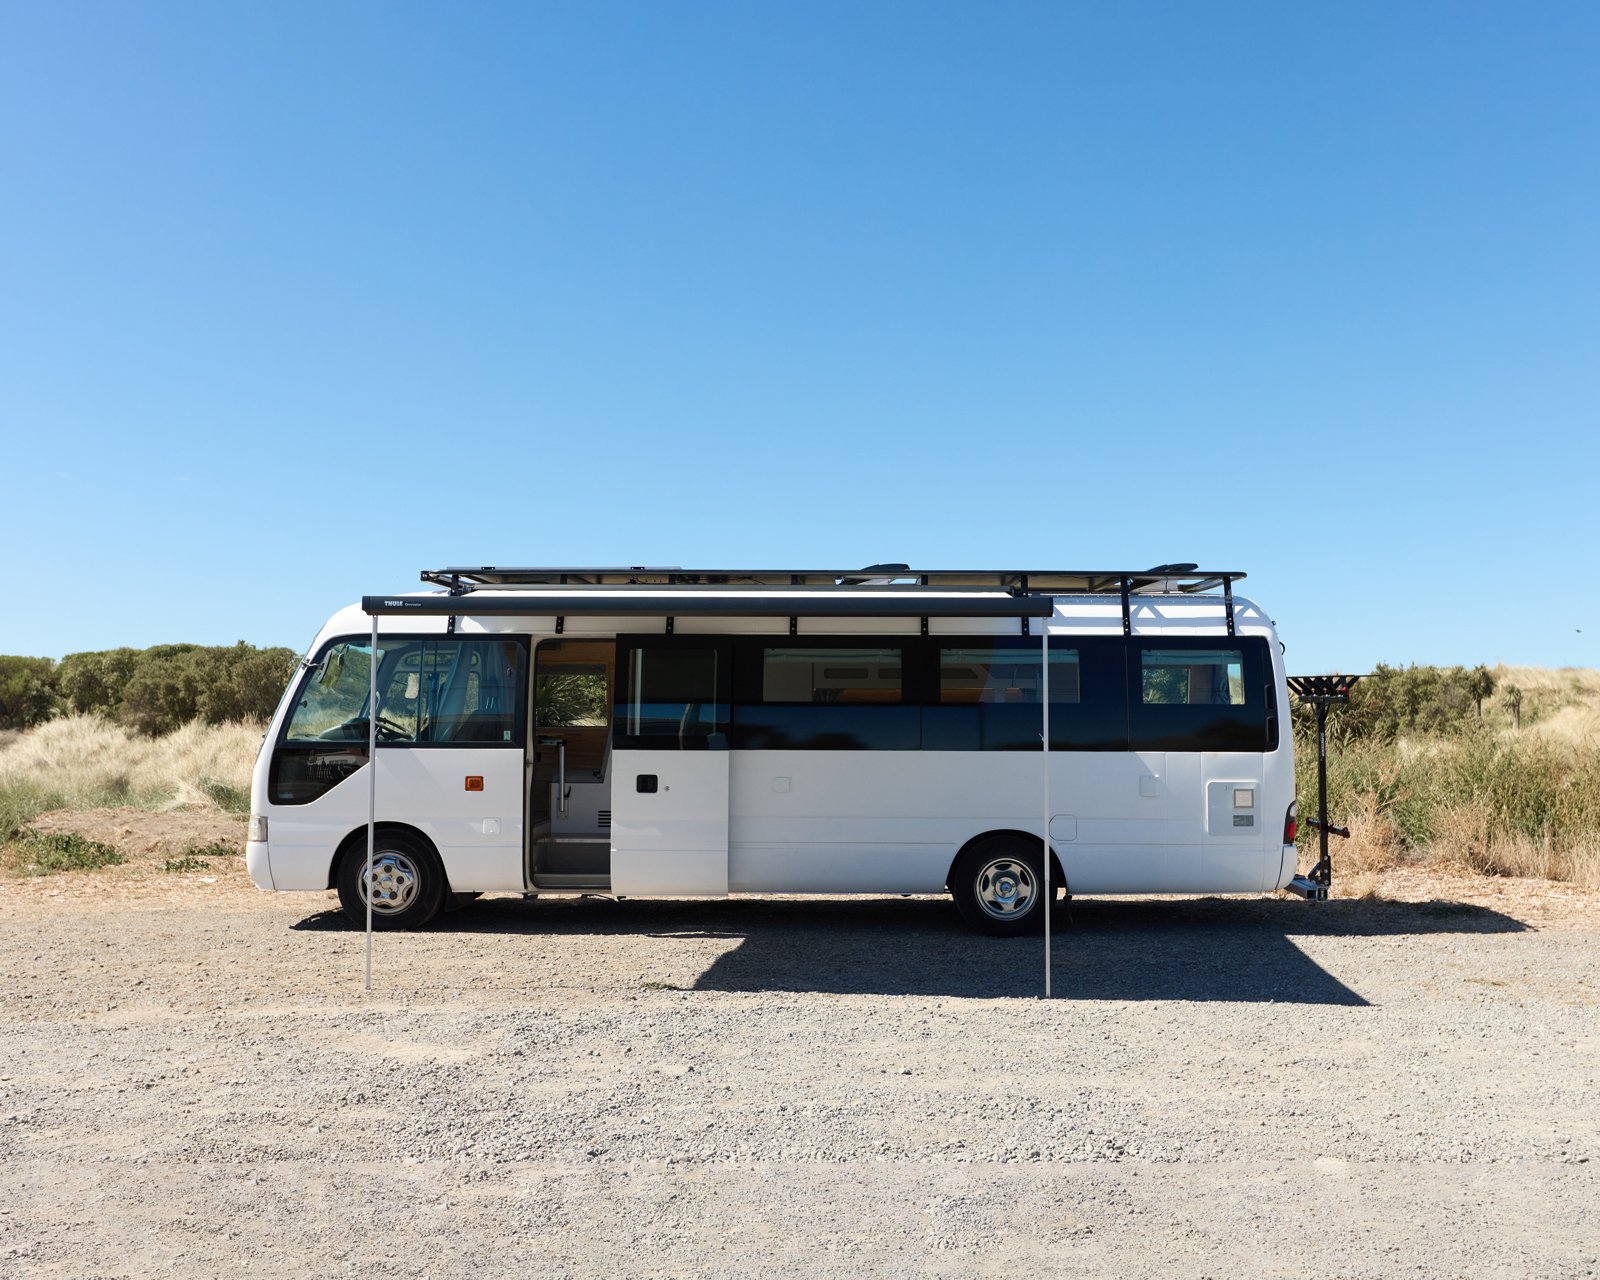 Bridget and her family of four wanted a campervan that could be a home base for wherever they wanted to go. As marathon runners who love exploring New Zealand, a Toyota Coaster was their vehicle of choice, offering plenty of space for their little fa